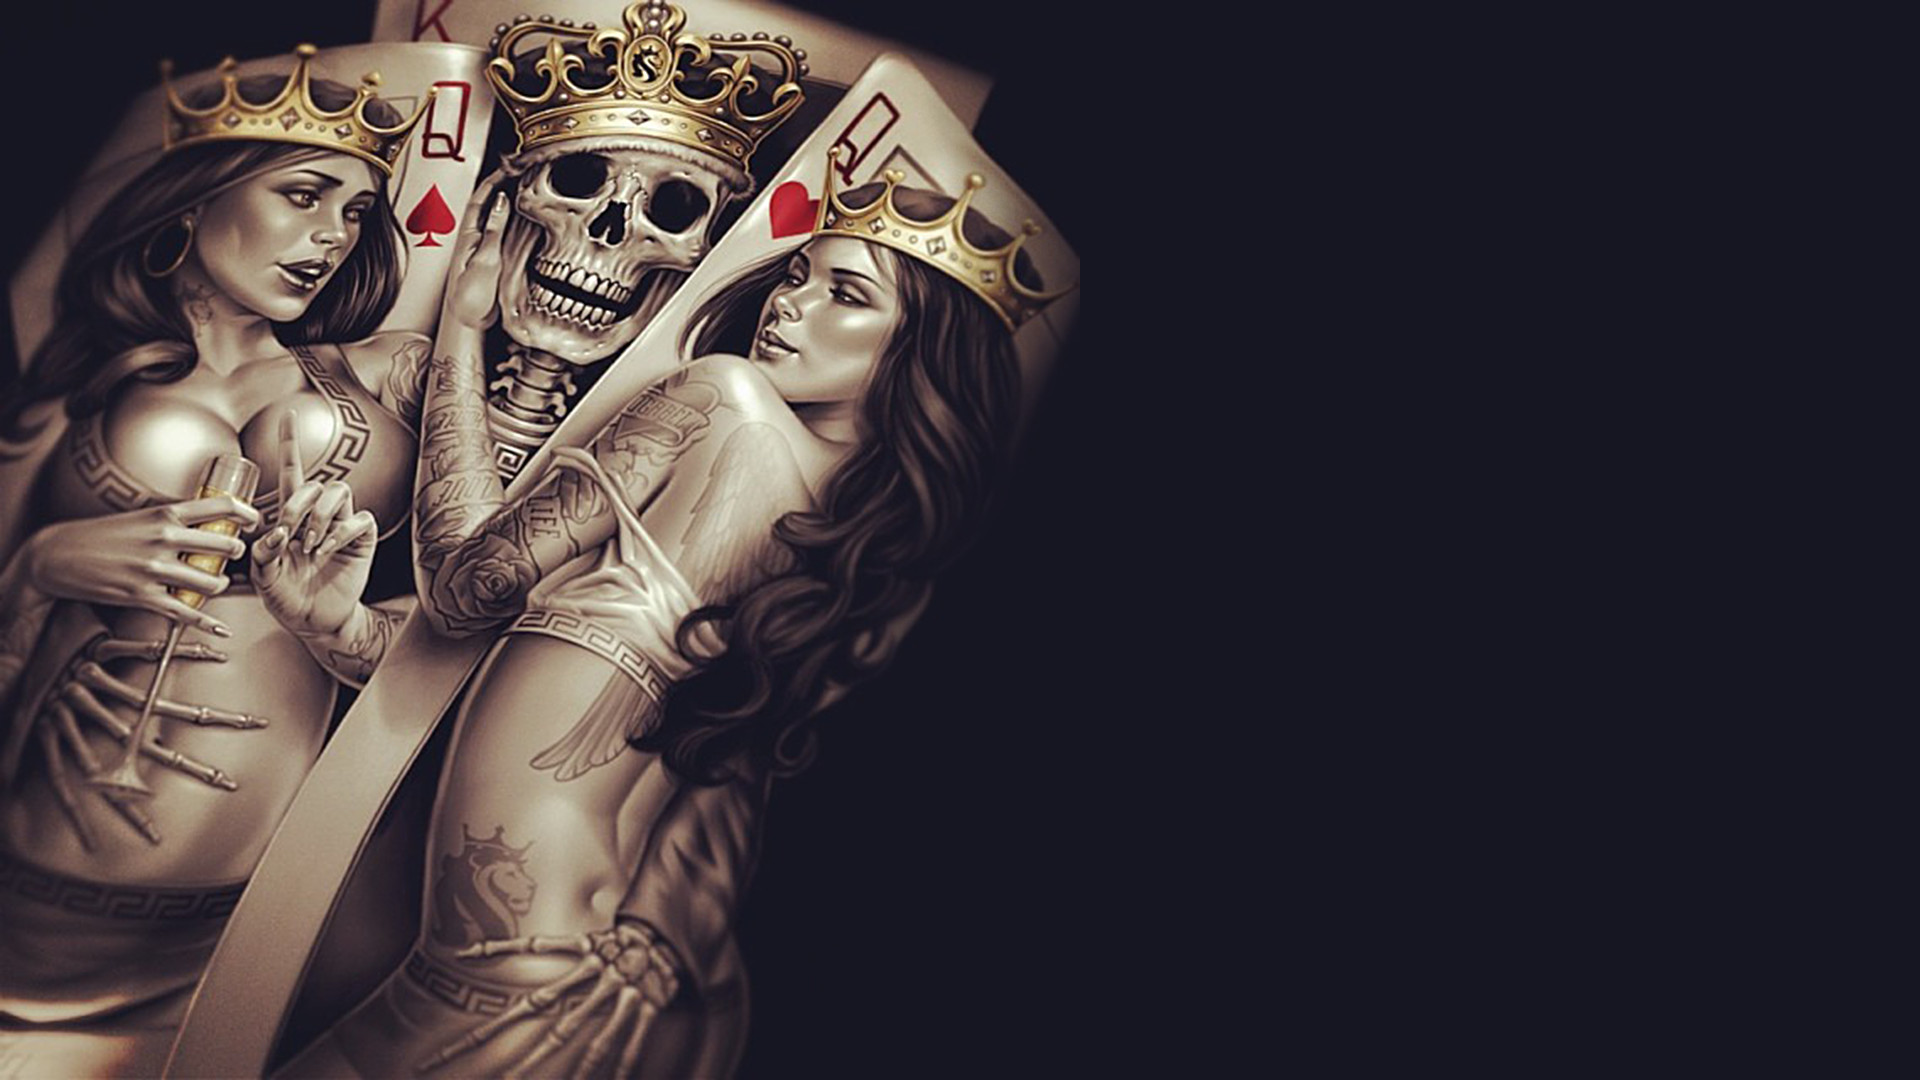 1920x1080 Free Skull Wallpapers | Wallpapers, Backgrounds, Images, Art Photos.